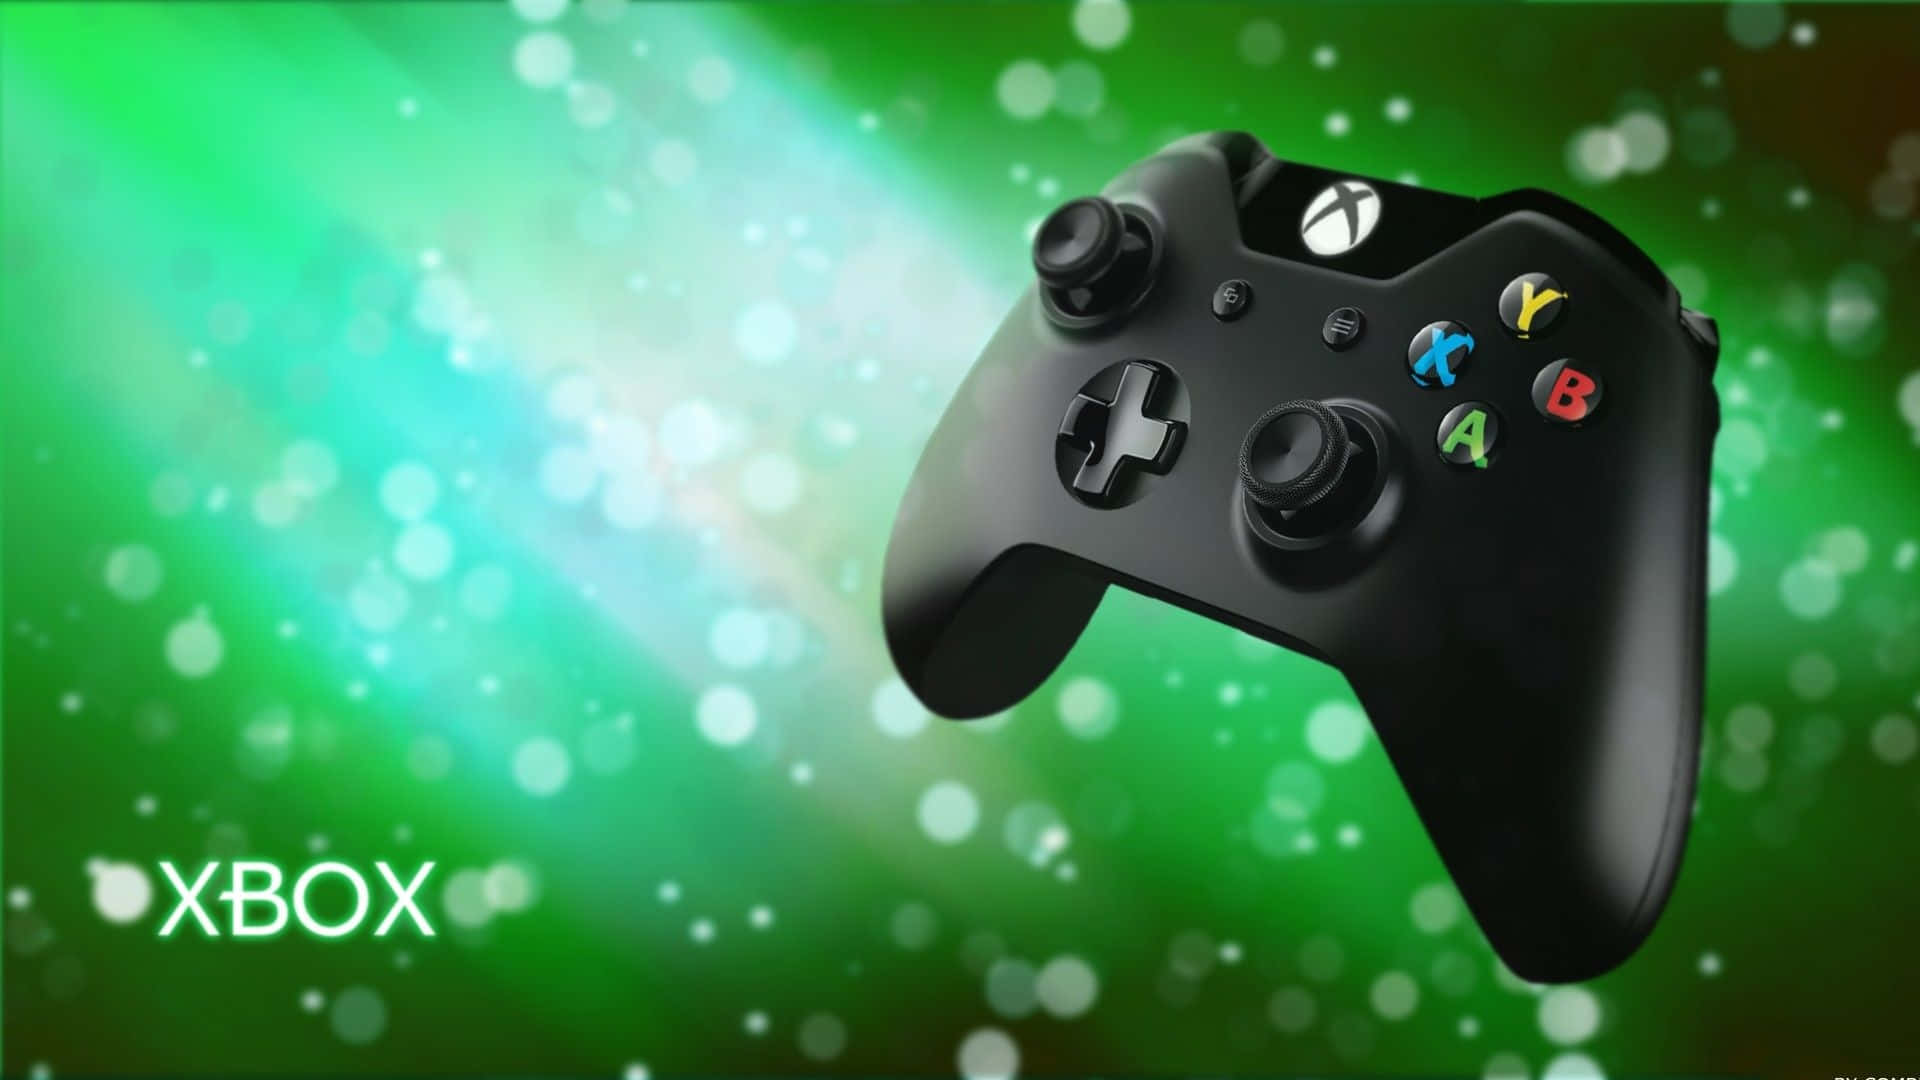 Cool Xbox Green Poster Background